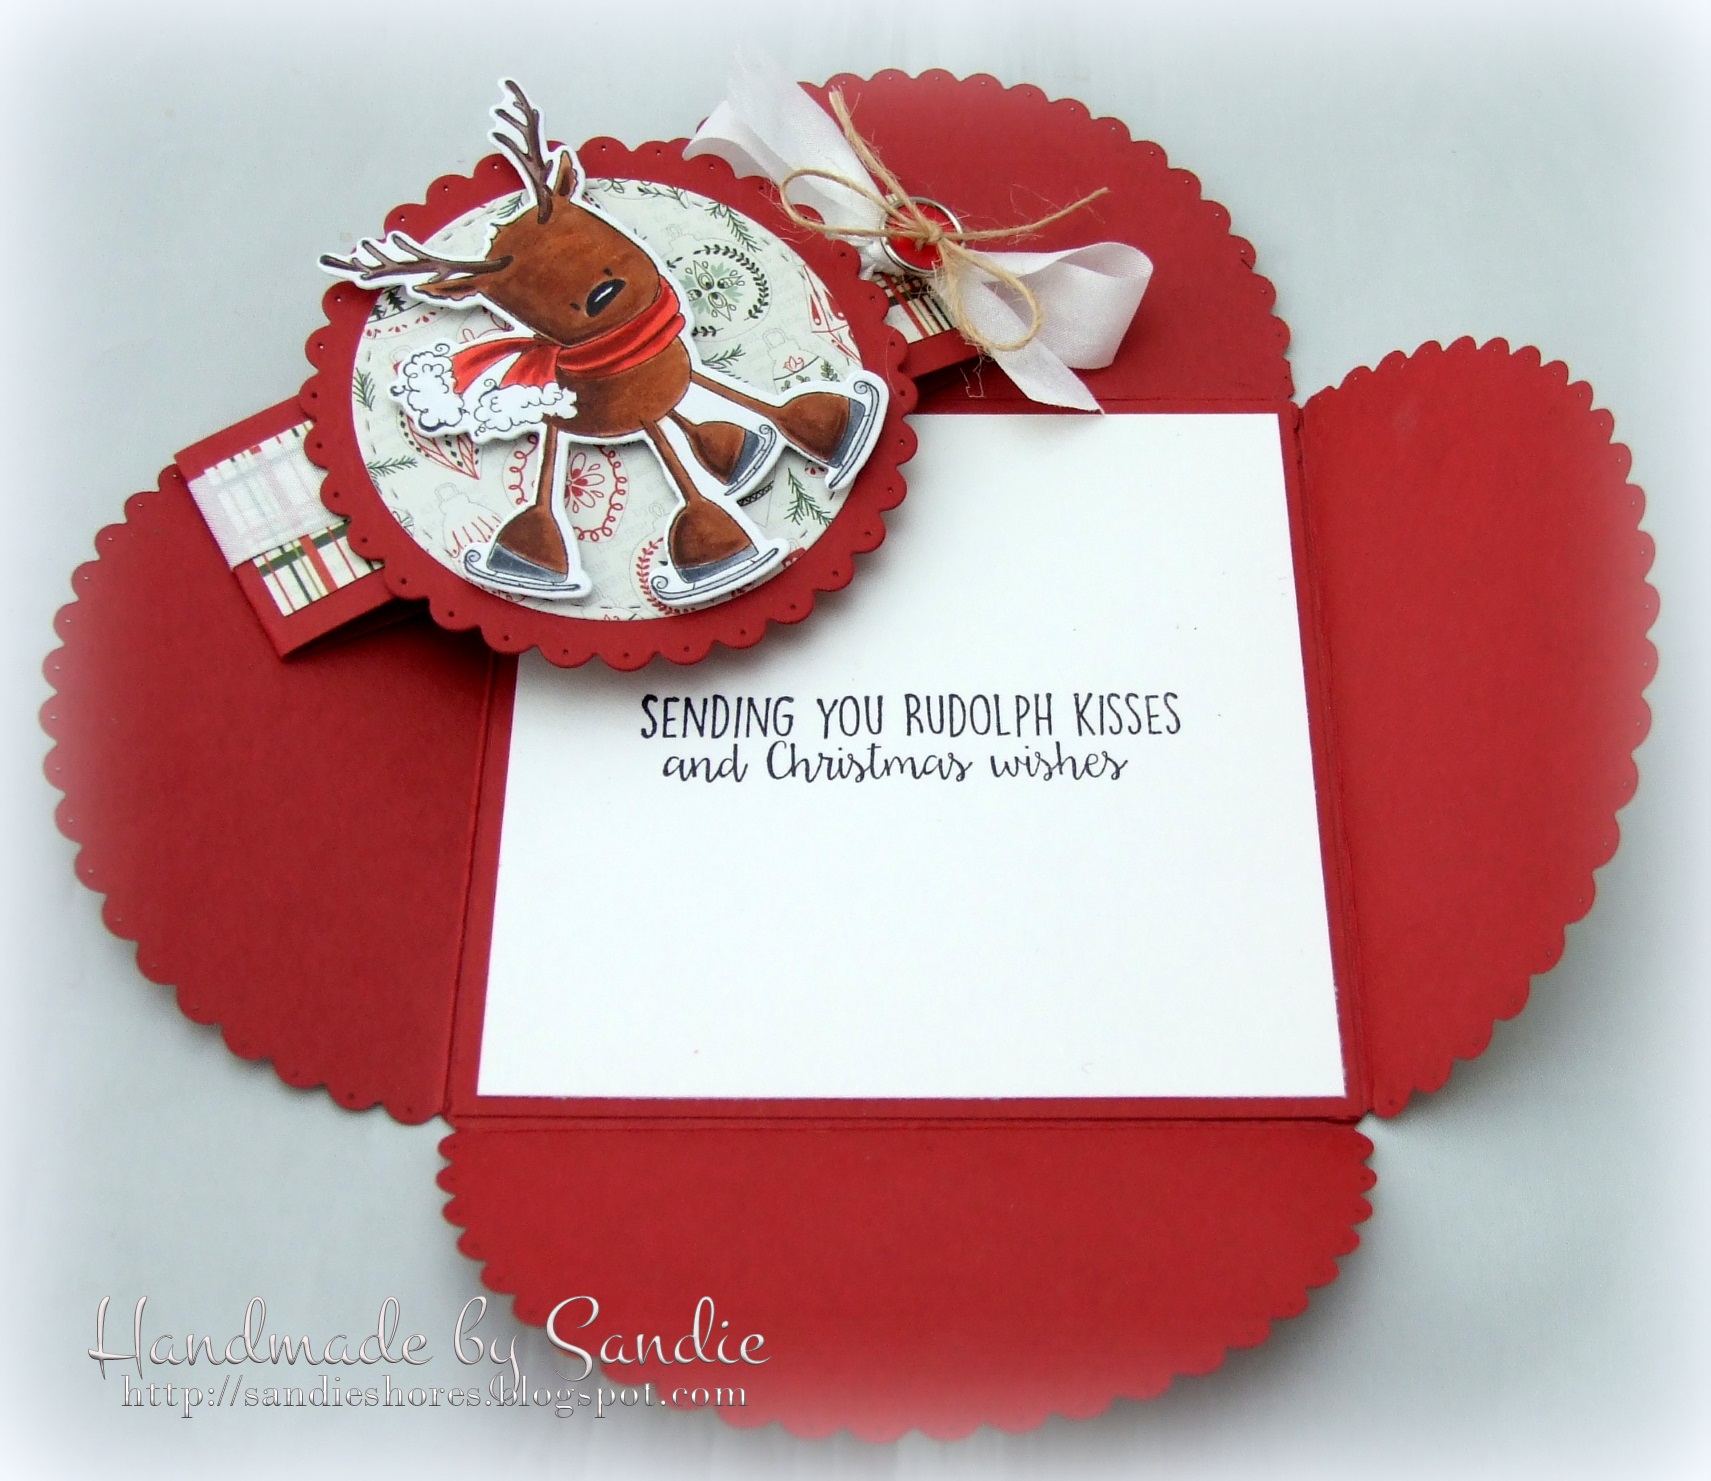 Stamping Bella - Sandiebella's Envelope Card. Click through for the full step by step tutorial!